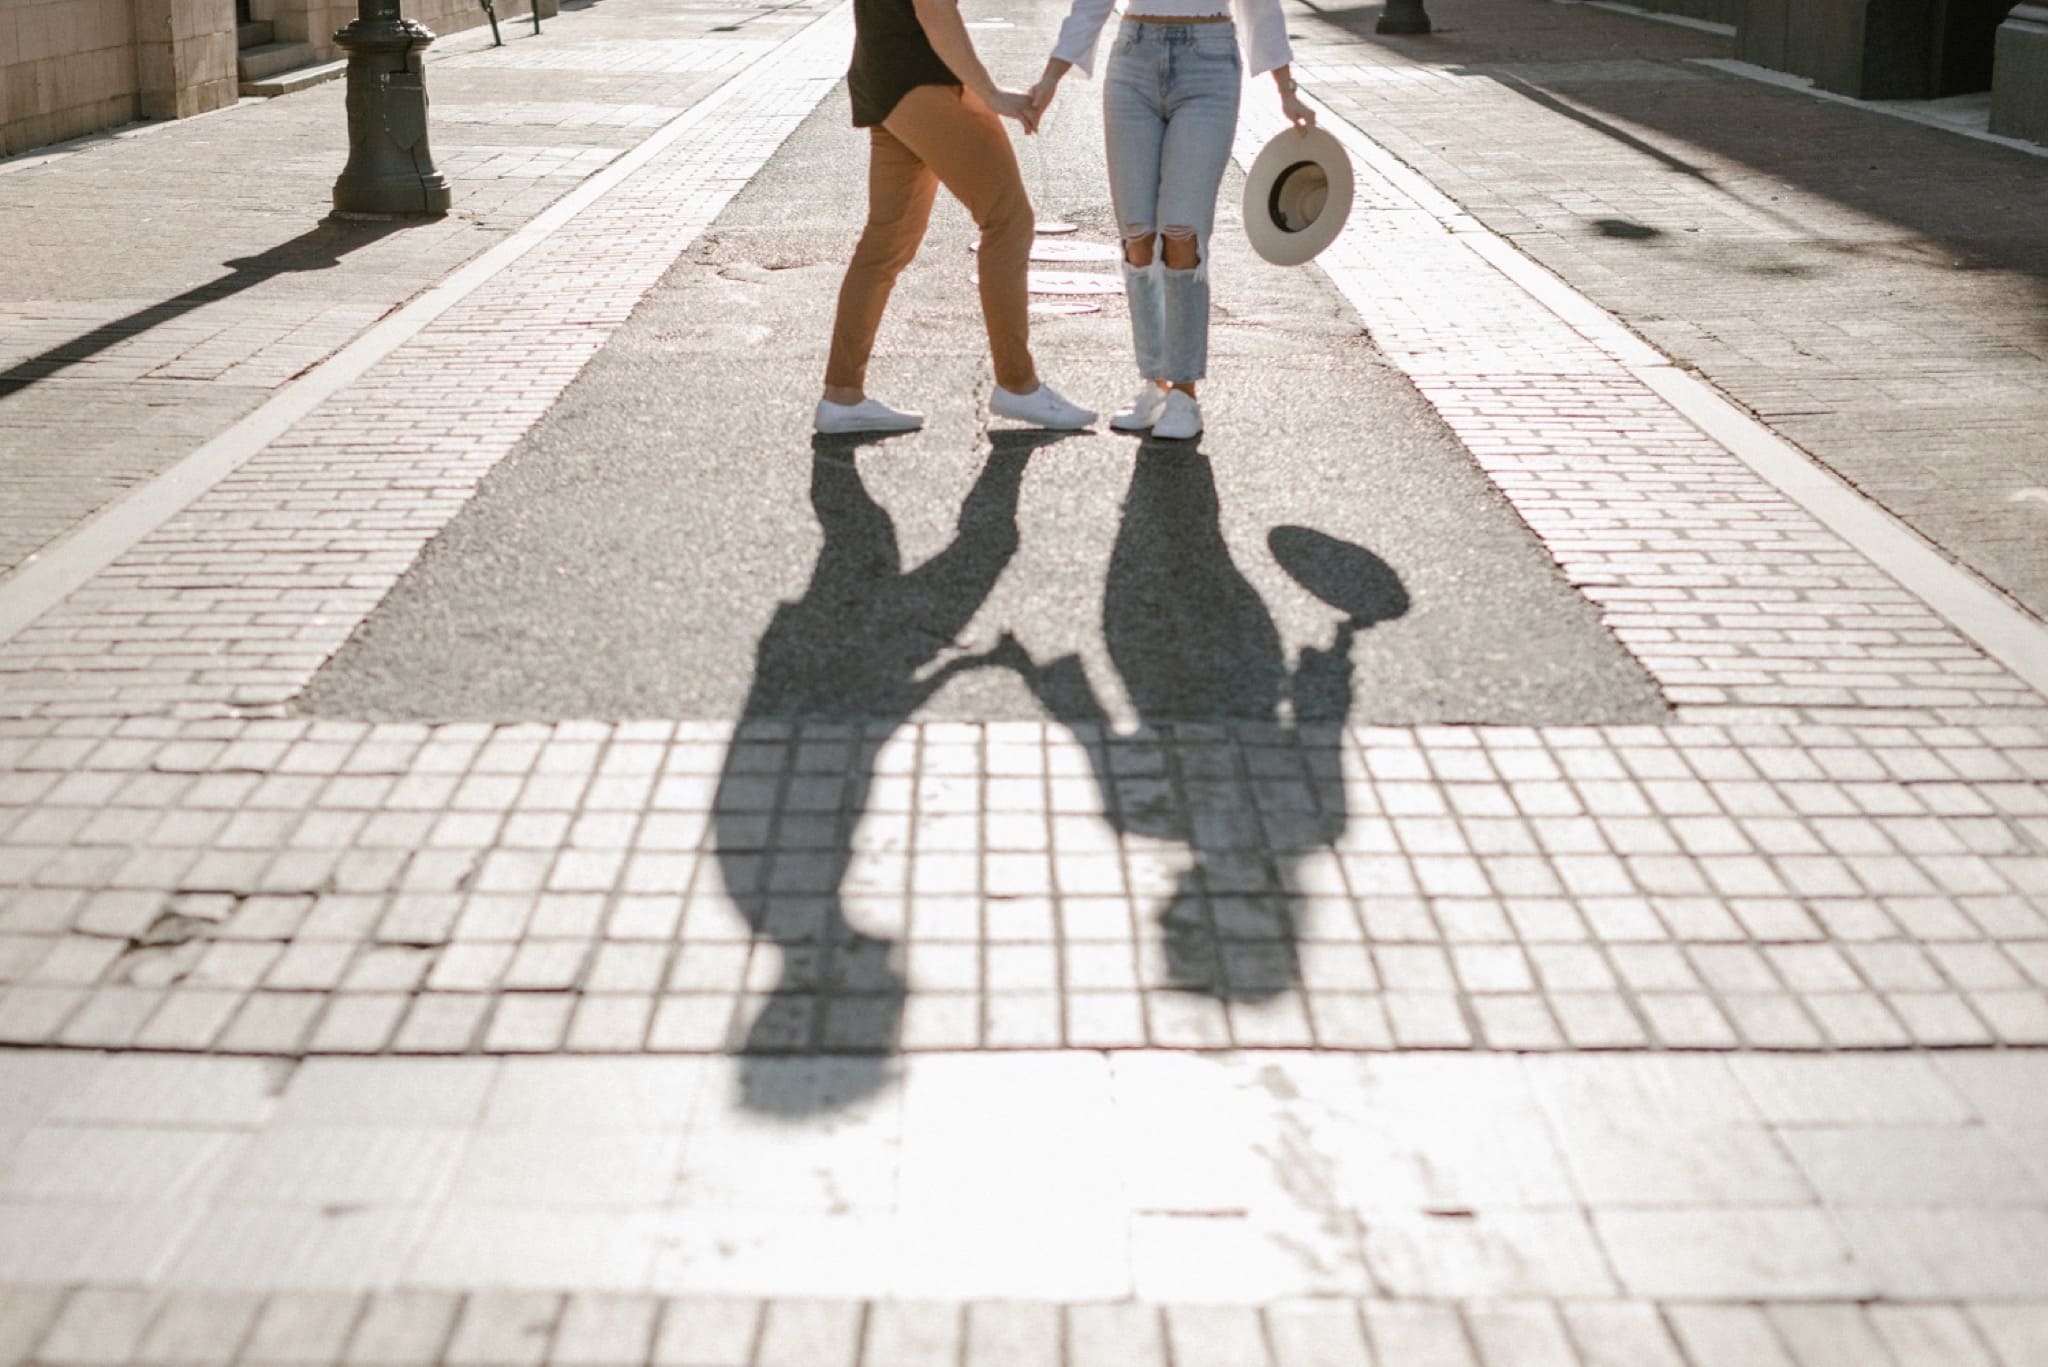 Downtown New Orleans Engagement Session